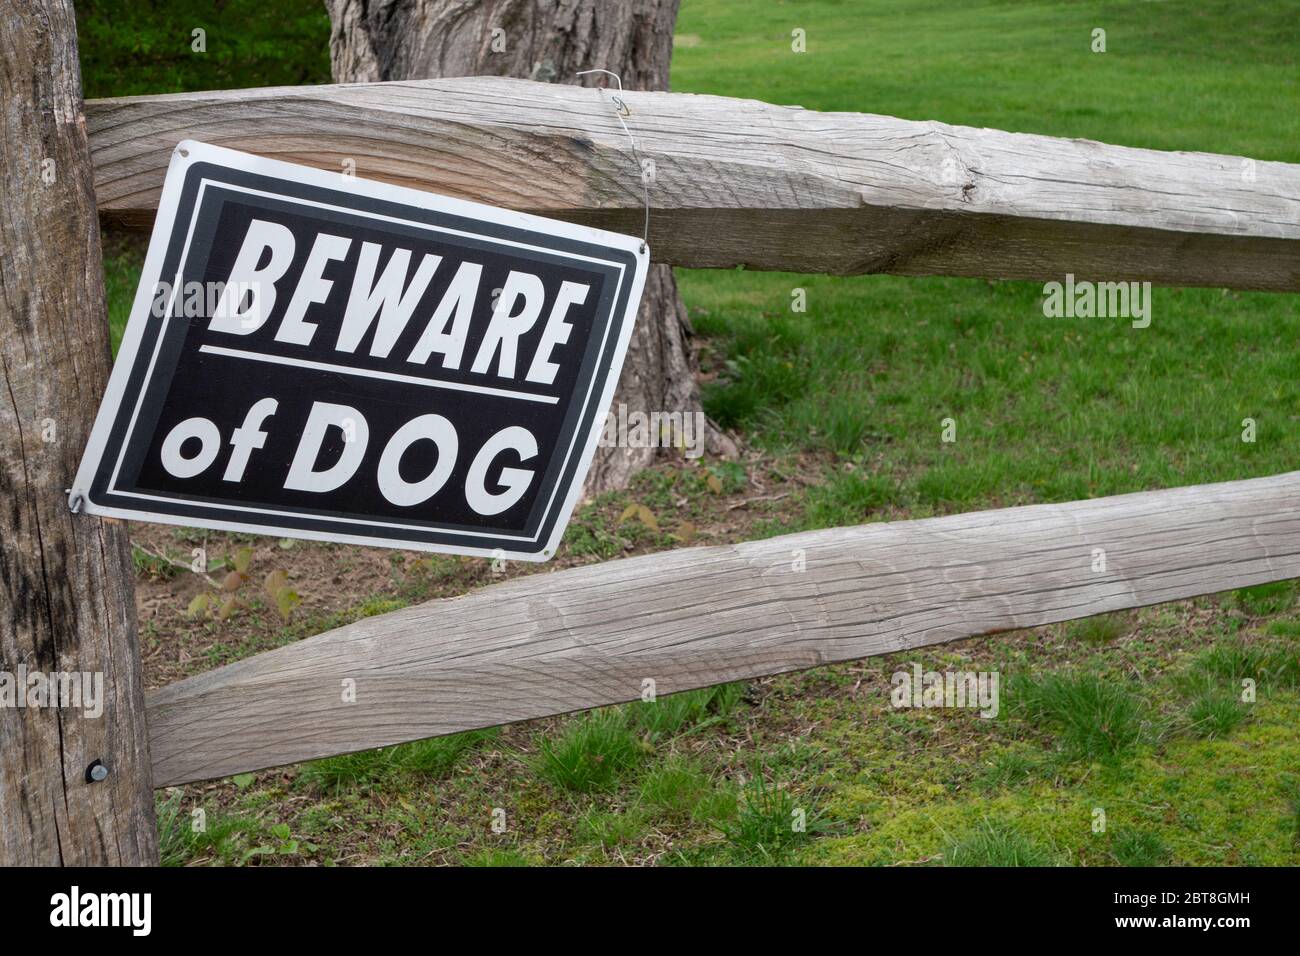 Front lawn with tree and two rail wooden fence with sign that reads 'Beware of dog' Stock Photo